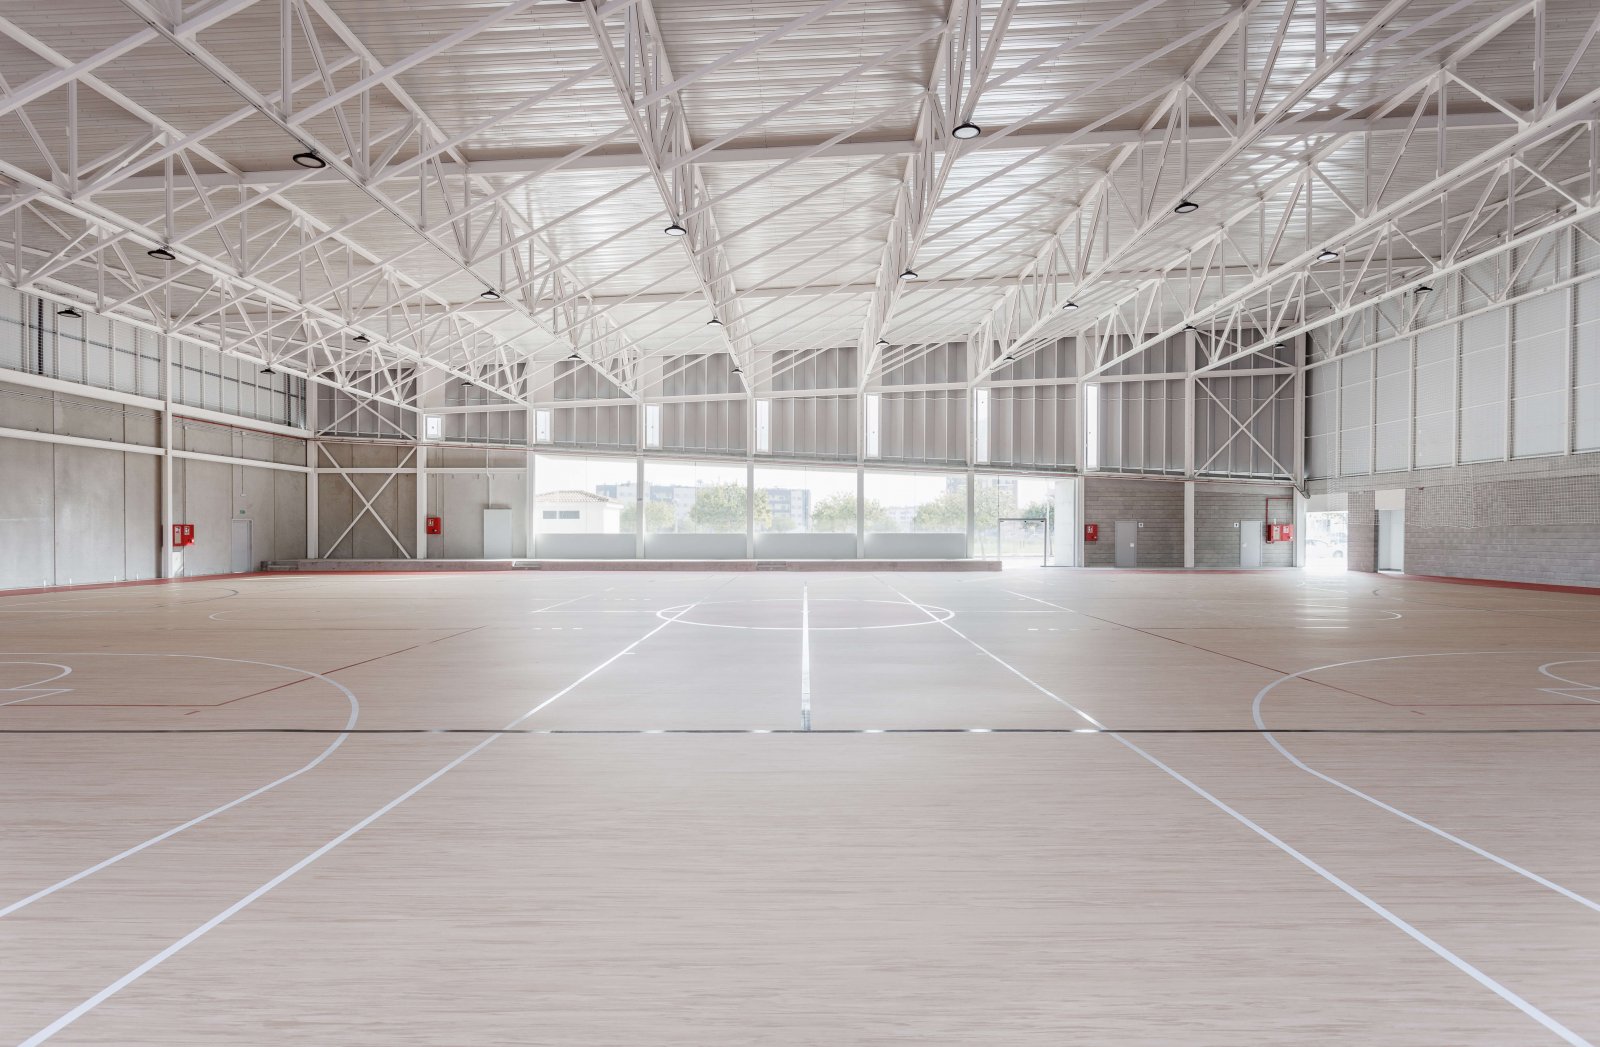 Another view of the sports court with parquet floors marked for basketball and football